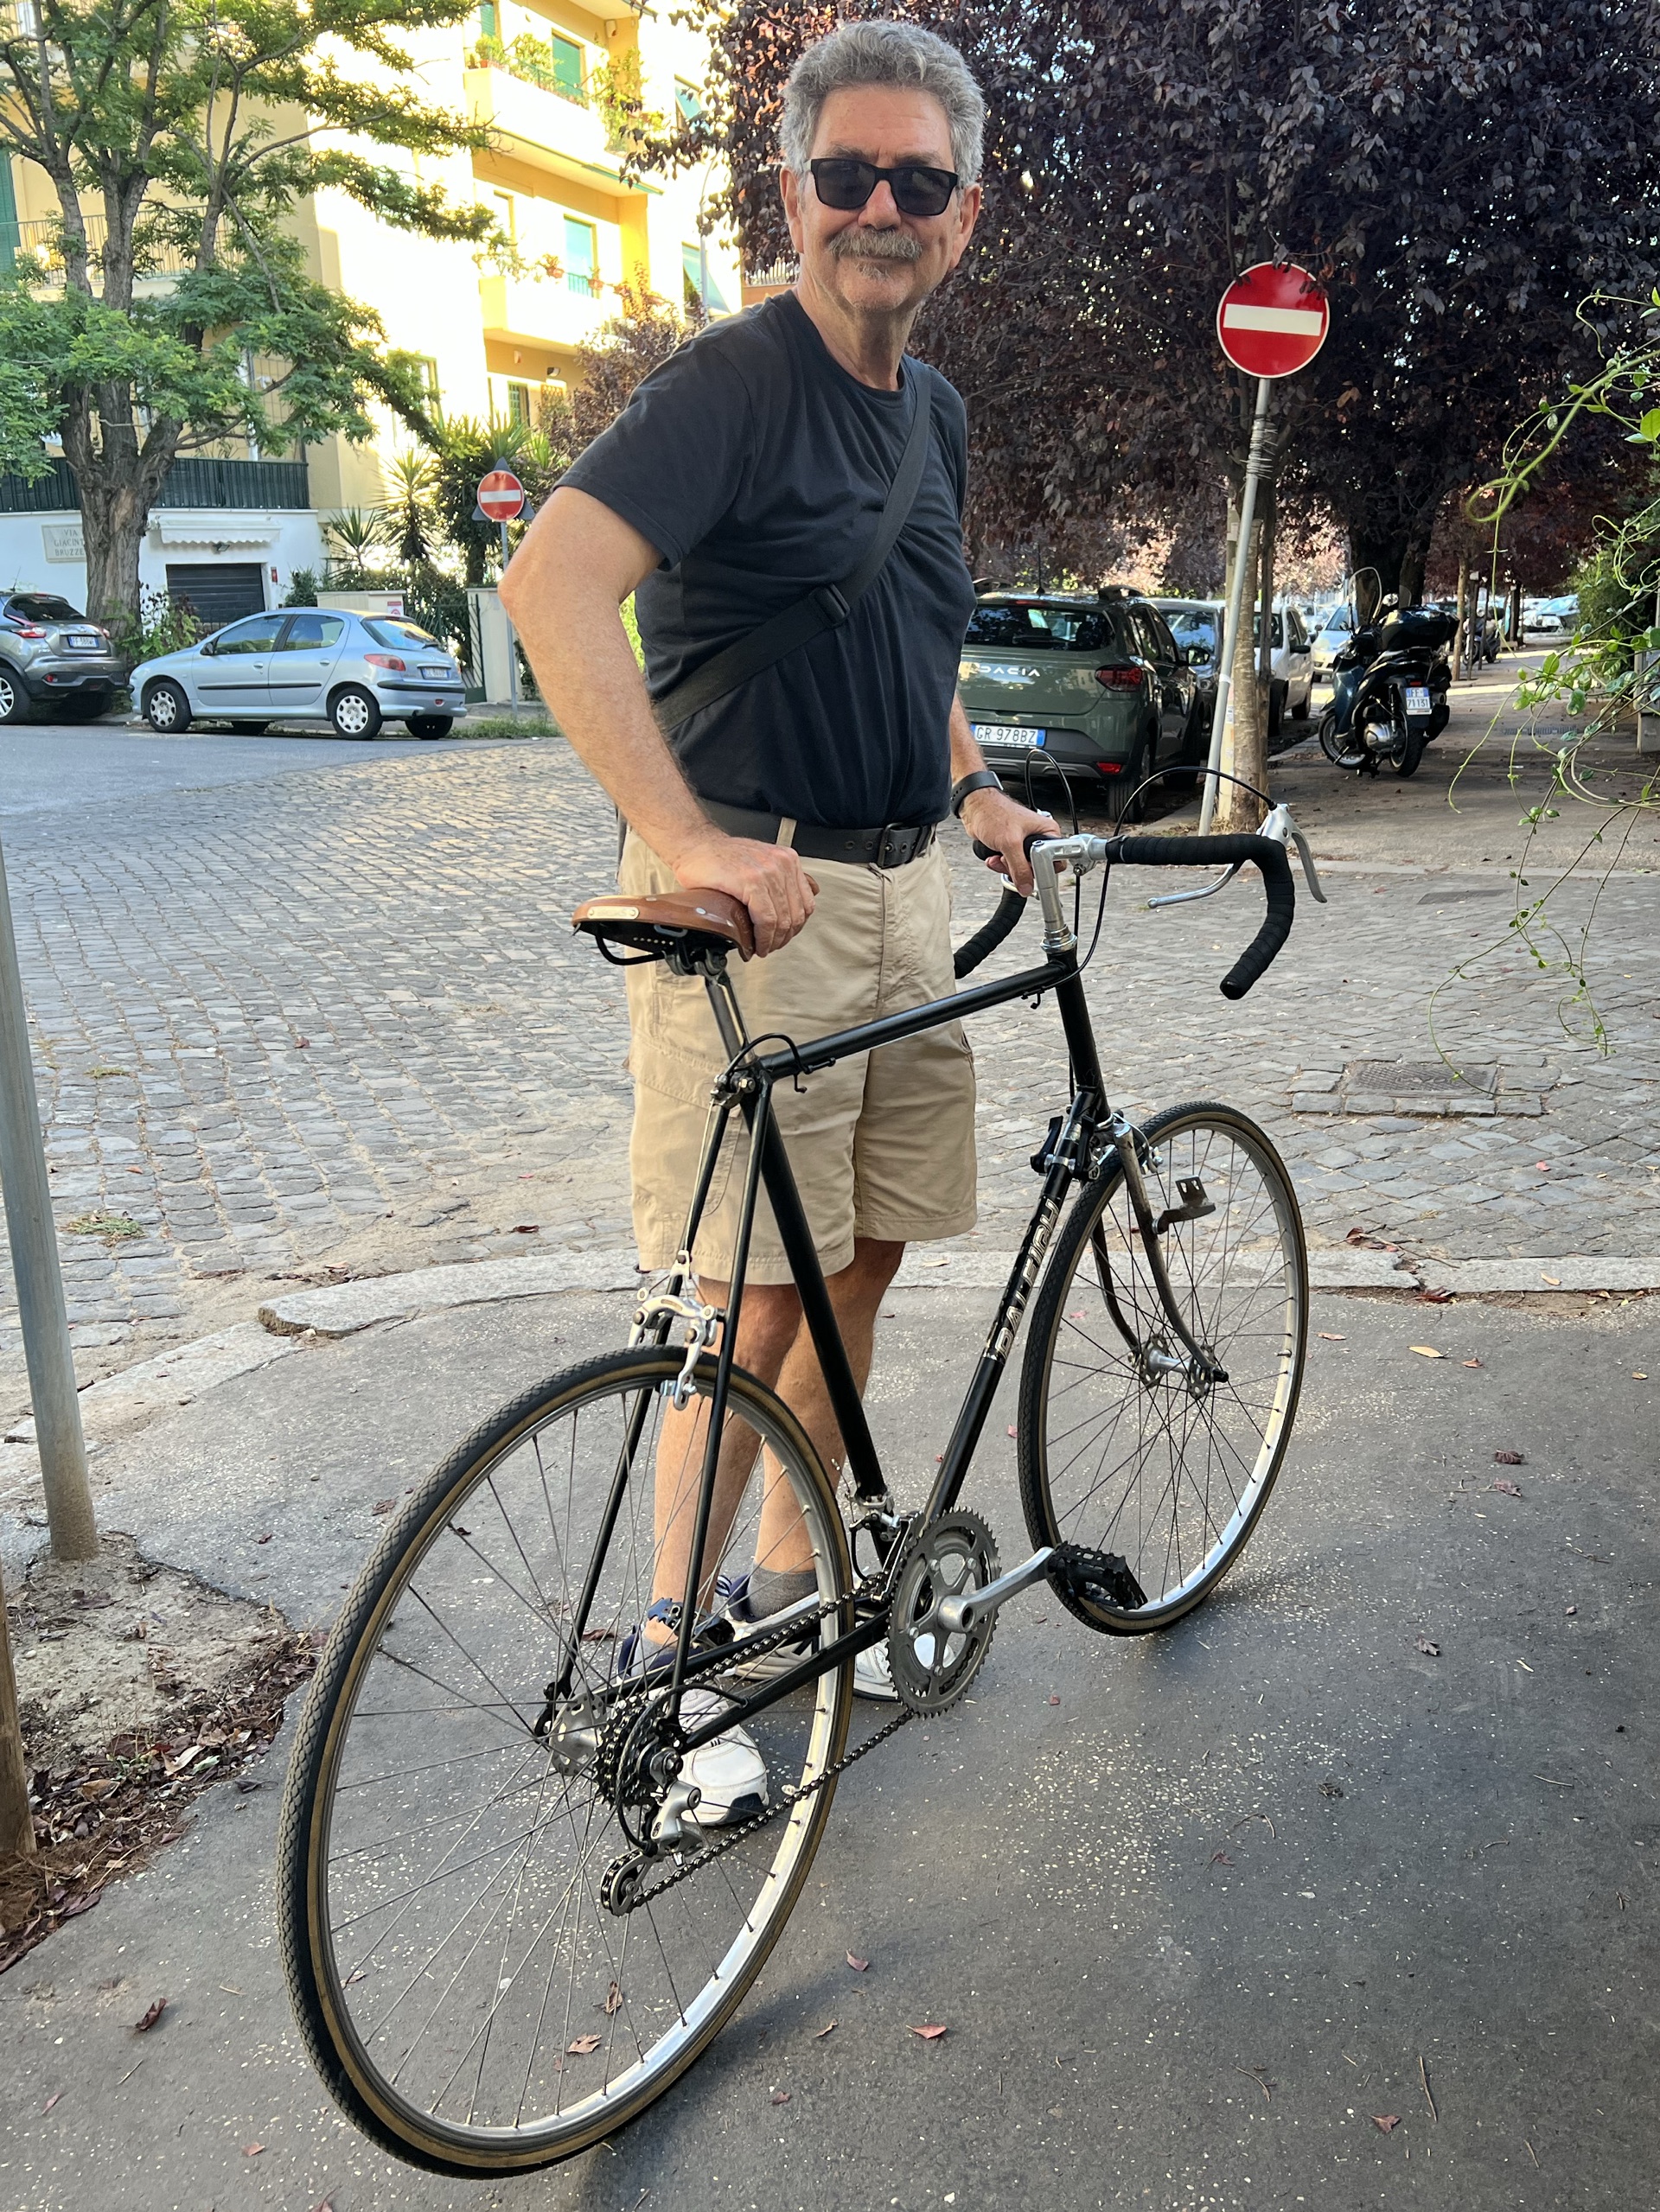 Me, wearing a black T-shirt and brown shorts, standing holding my refurbished Raleigh supressing almost idiotic grin.